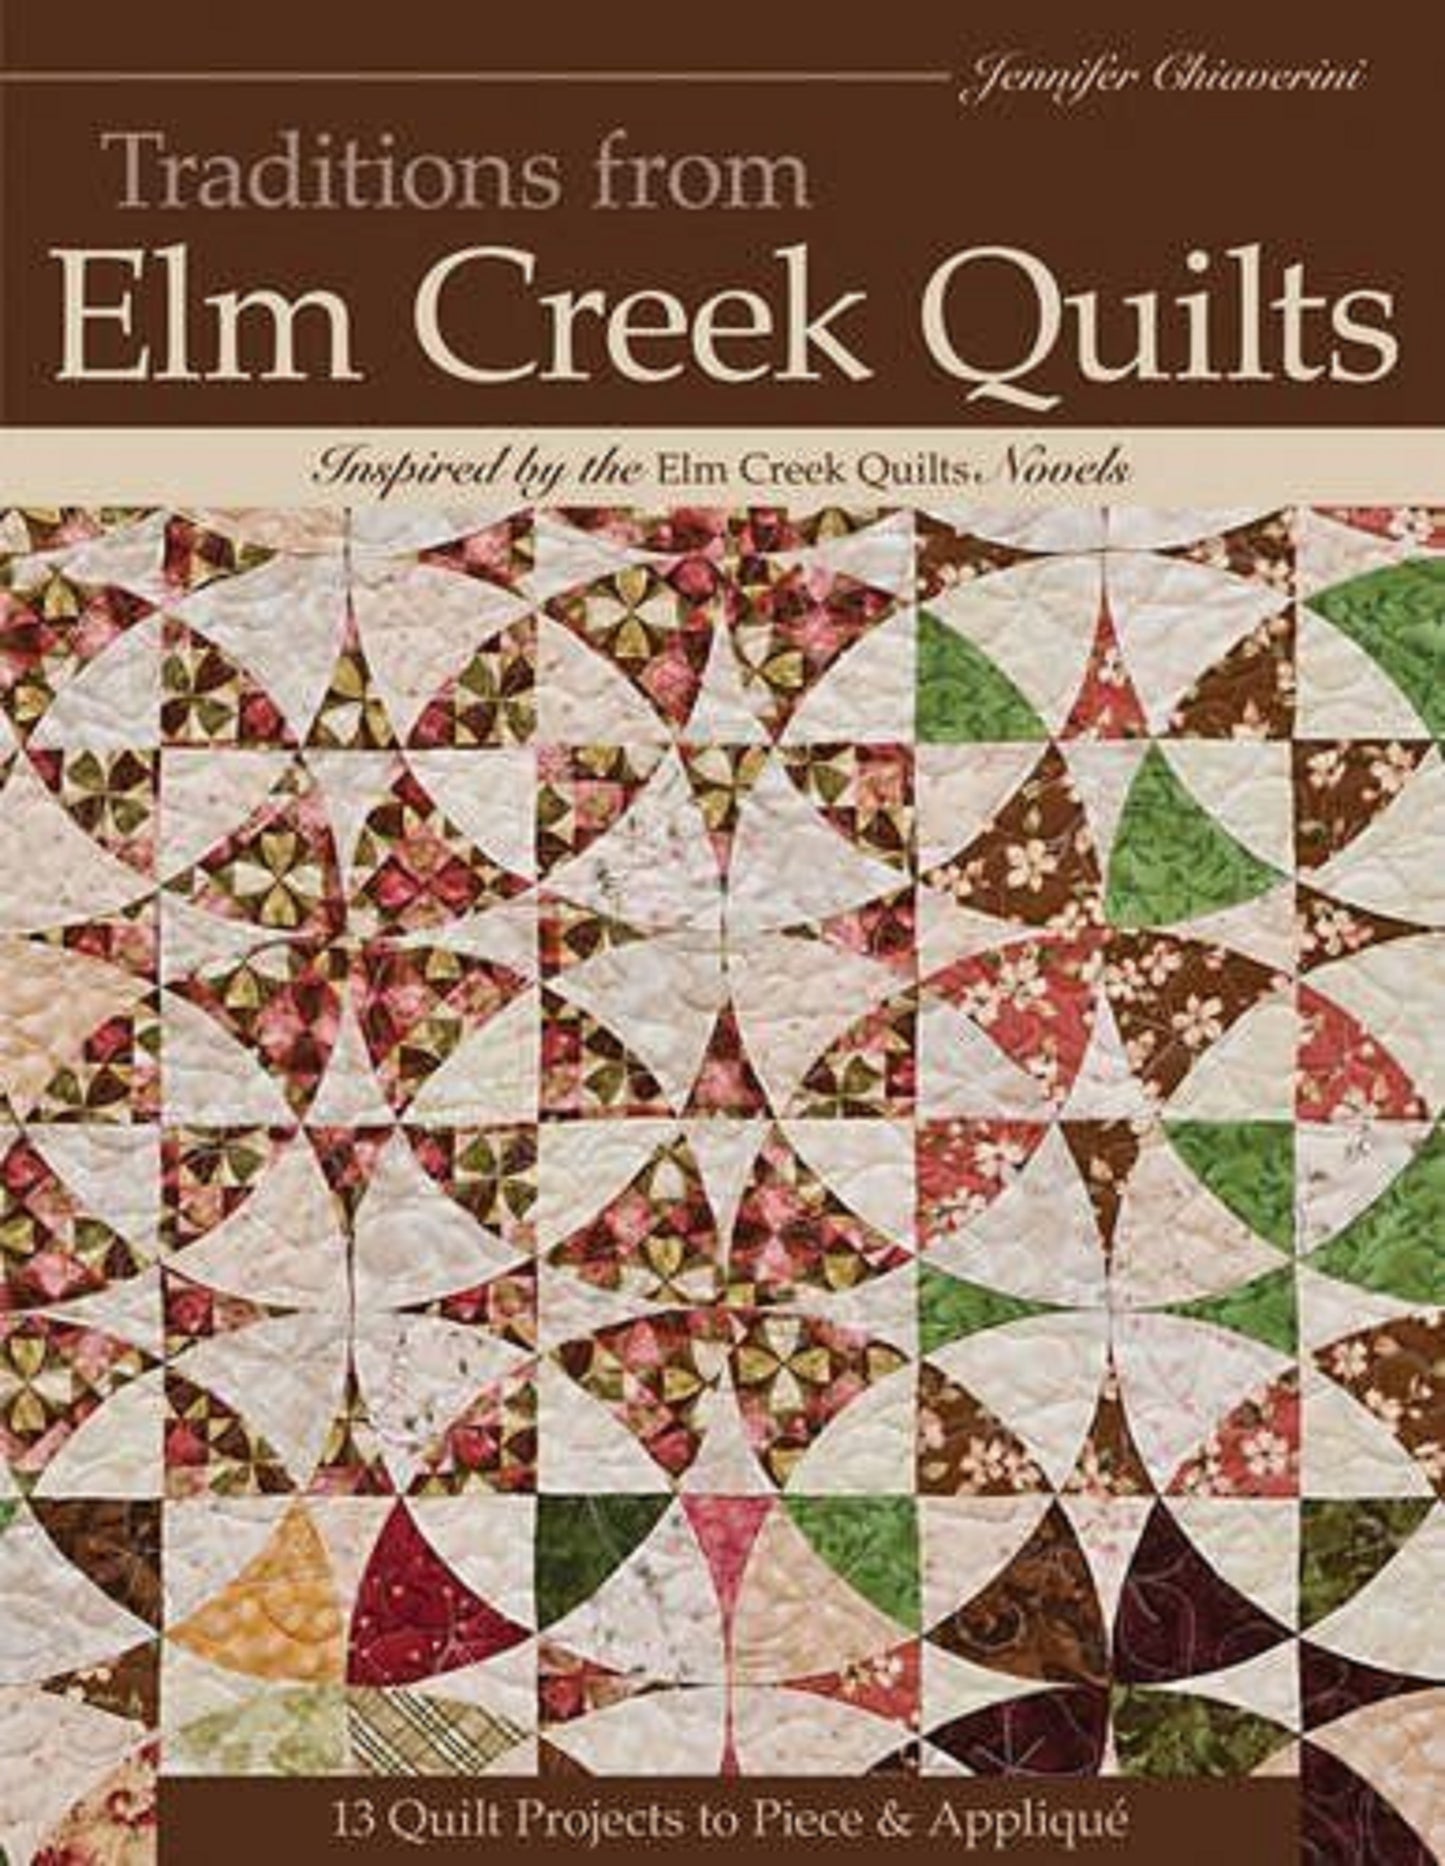 Traditions From Elm Creek Quilts by Jennifer Chiaverini